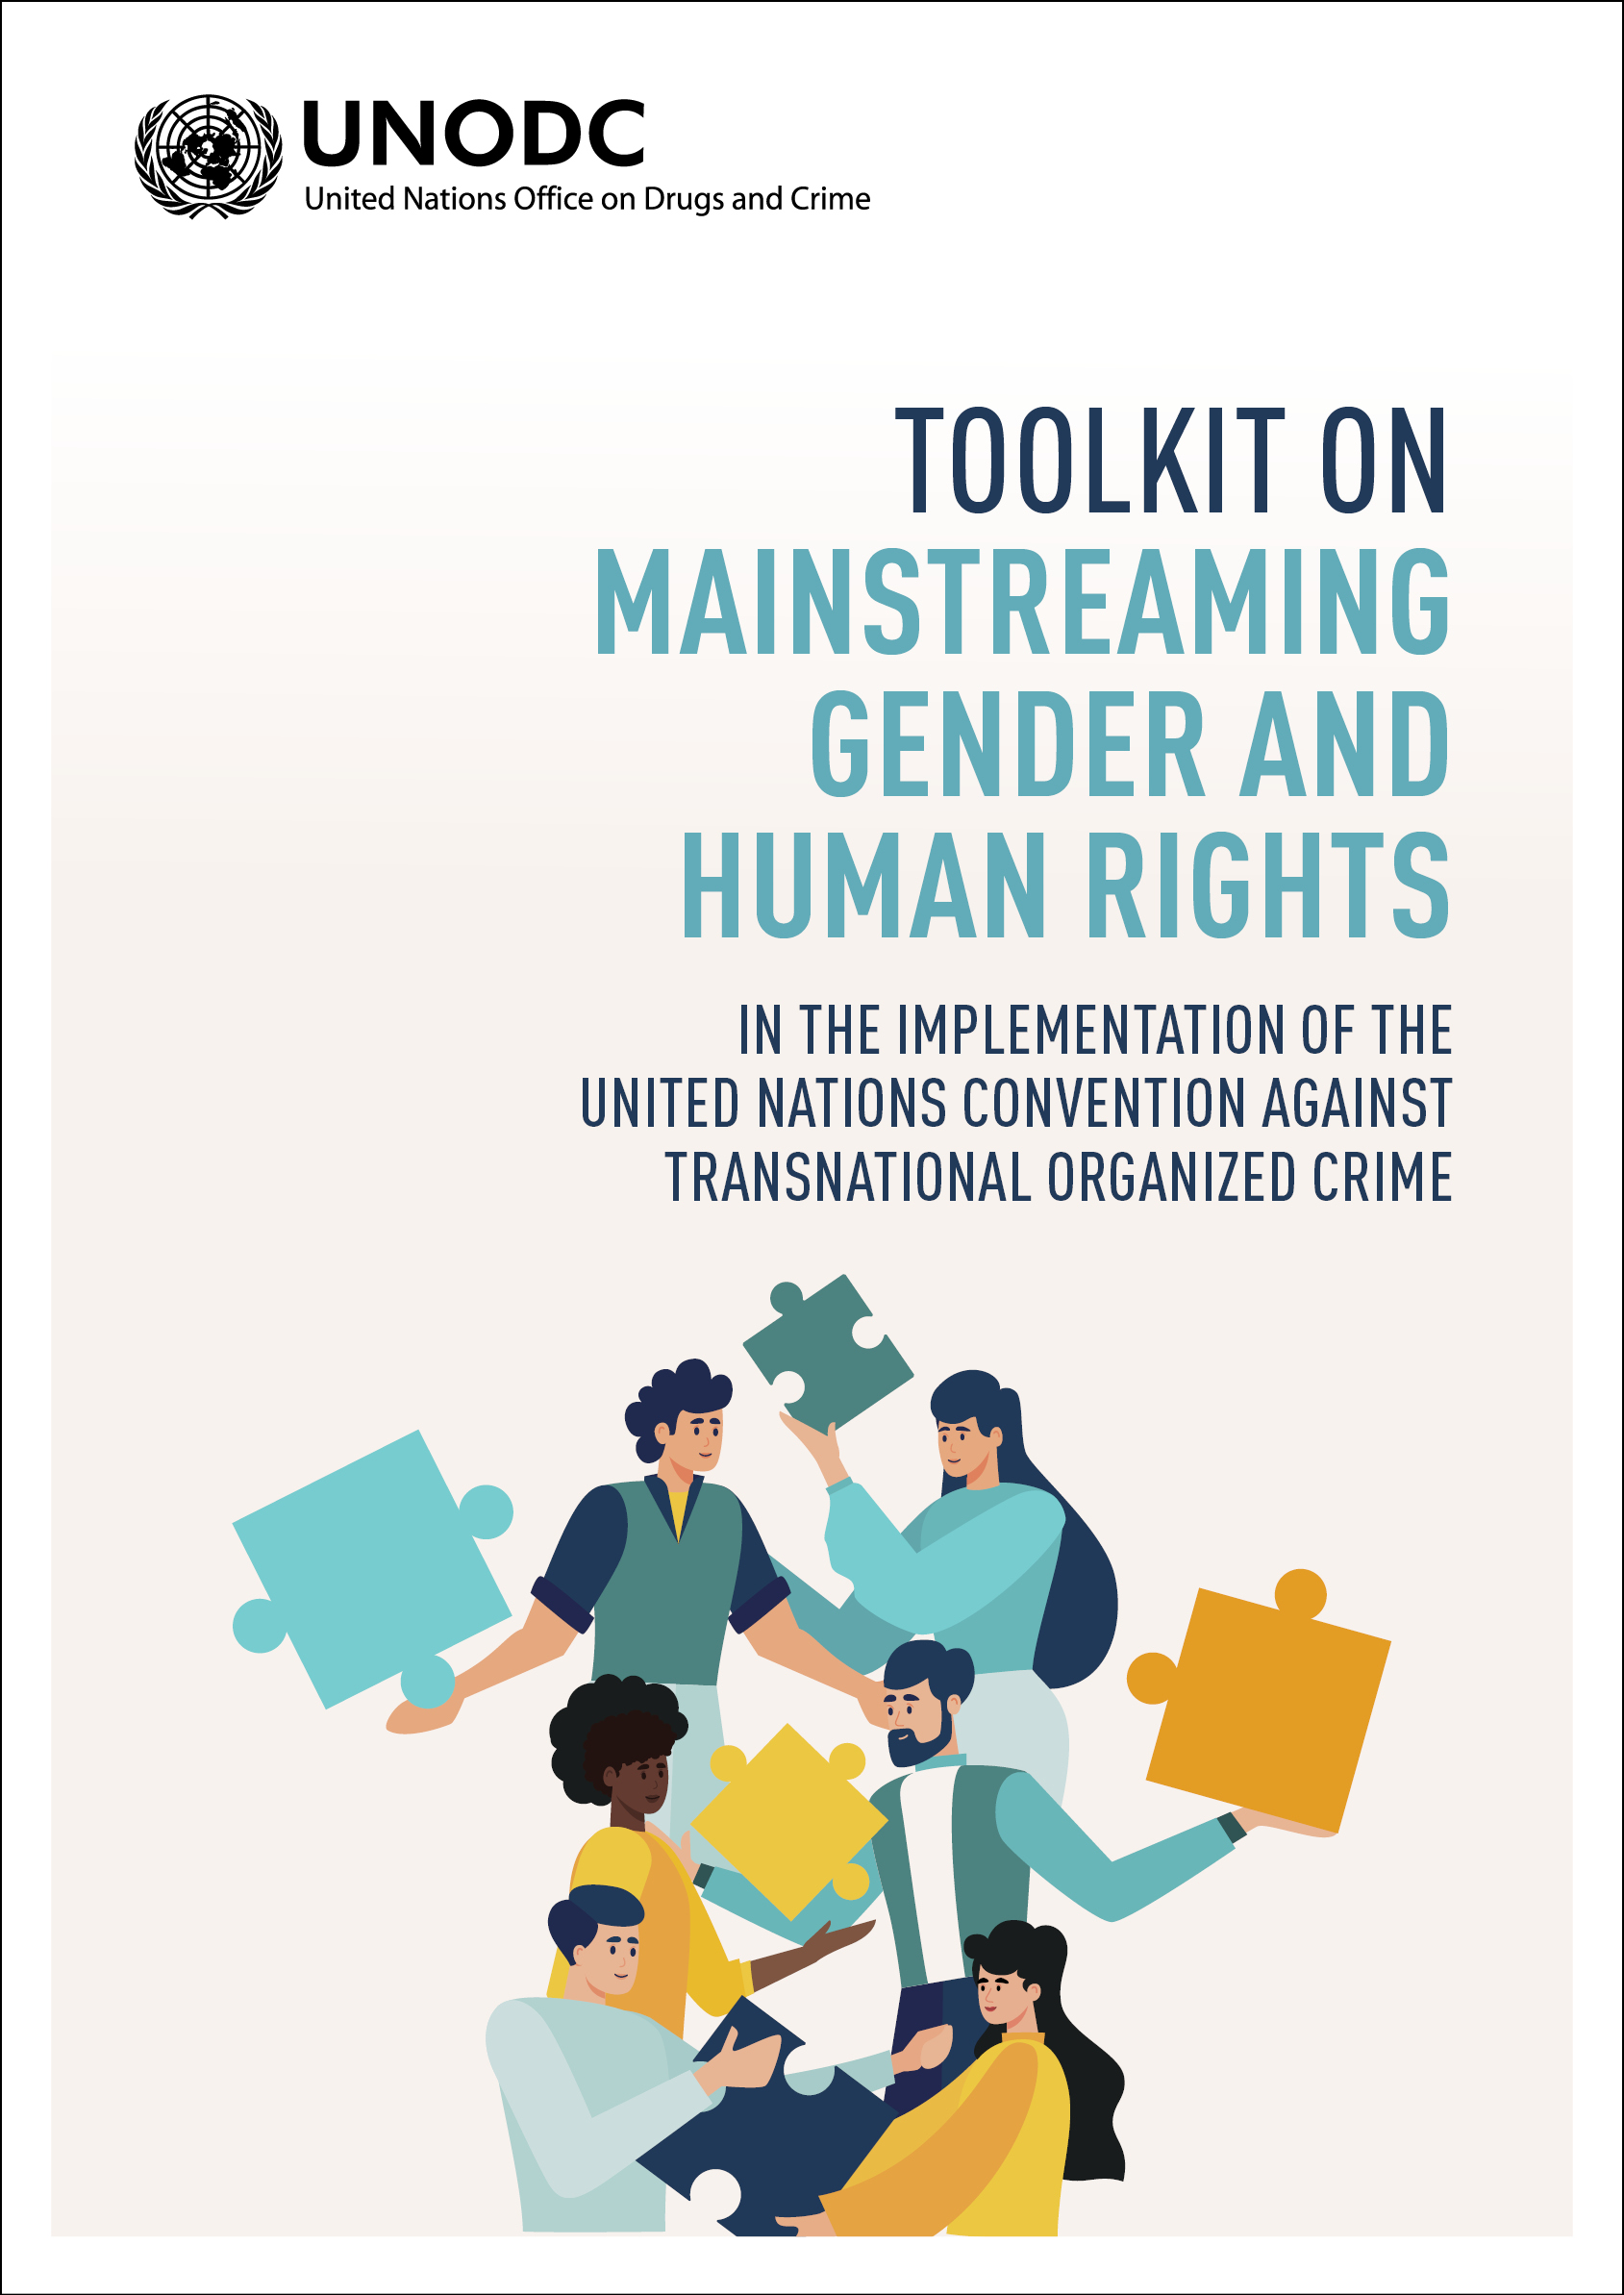 <div> </div>
<div style="text-align: center;">Toolkit on Mainstreaming Gender and Human Rights in the Implementation of the United Nations Convention against Transnational Organized Crime</div>
<div style="text-align: center;">(<a href="/cld/uploads/pdf/2313100A-Toolkit-gender-mainstreaming-ebook.pdf">A</a> - <a href="https://sherloc.unodc.org/cld/uploads/pdf/Tools_and_Publications/Toolkit-gender-_and_human_rights_mainstreaming-ebook-EN.pdf">E</a> - <a href="/cld/uploads/pdf/Toolkit_Gender_and_Human_Rights_Mainstreaming_French.pdf">F</a> - <a href="/cld/uploads/pdf/Toolkit_Gender_and_Human_Rights_Mainstreaming_Russian.pdf">R</a> - <a href="/cld/uploads/pdf/Toolkit_Gender_and_Human_Rights_Mainstreaming_Spanish.pdf">S</a> - <a href="/cld/uploads/pdf/Tools_and_Publications/Toolkit_Gender_and_Human_Rights_Mainstreaming_Portuguese.pdf">Portuguese</a>)</div>